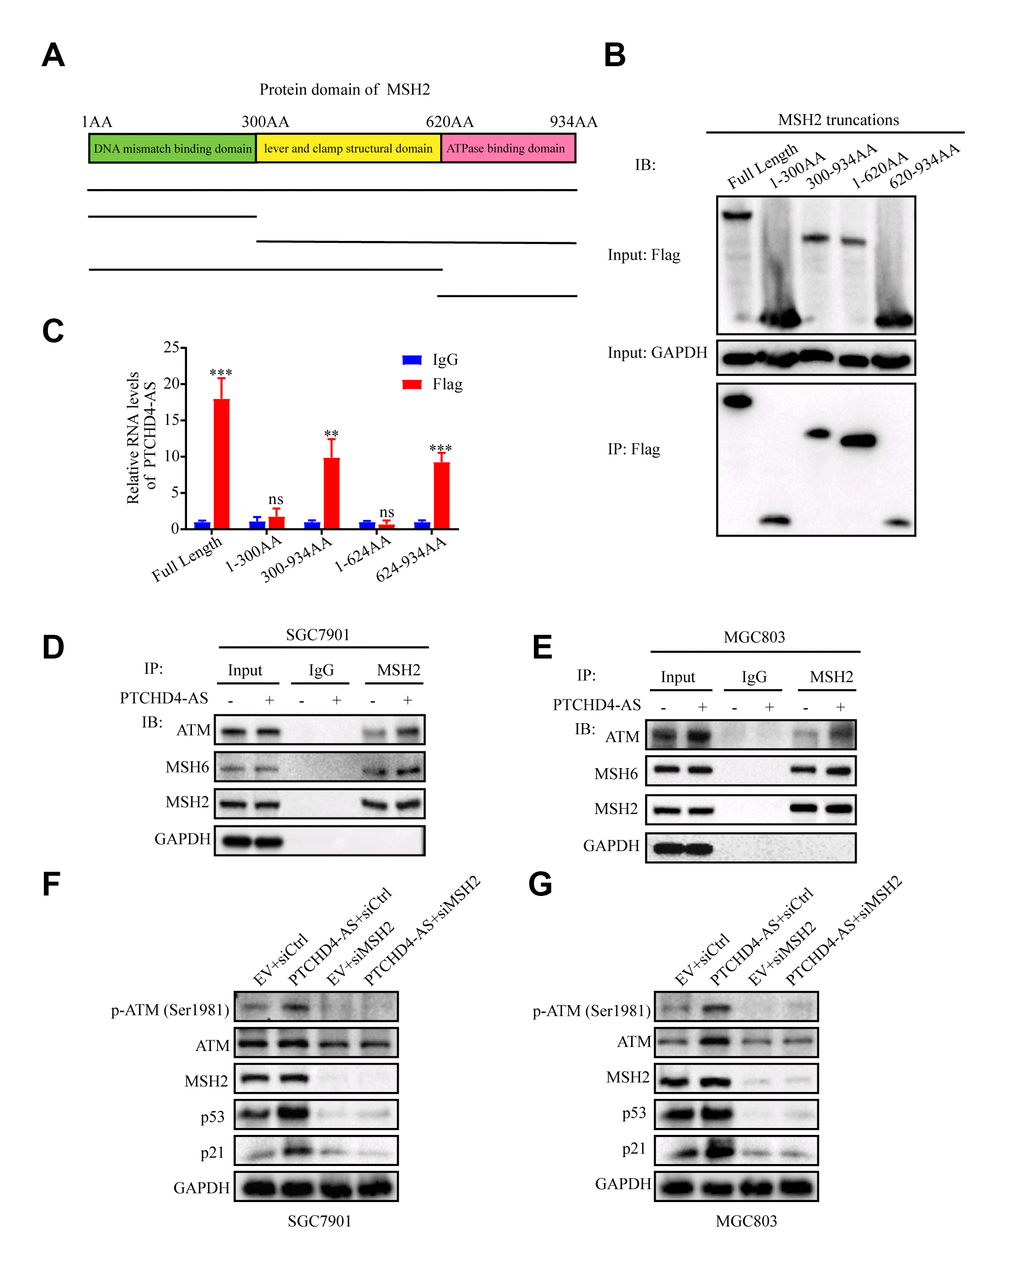 Upregulation of PTCHD4-AS promoted MSH2-MSH6 dimerization and activated the ATM-p53-p21 pathway. (A) Schematic diagram of truncated MSH2 used in pull-down assays. (B) After transfection of 3xFlag-MSH2 truncation in 293T cells for 48h, RIP was performed with anti-flag antibody. Western blot analyses of pull-down assays with truncated MSH2 fragments. (C) The relative expression level of PTCHD4-AS in the truncated MSH2 RIP was detected by RT-qPCR. IgG was used as a negative control. (D, E) Interaction analysis between MSH2, MSH6 and ATM in SGC7901 and MGC803 cells stably overexpressing EV or PTCHD4-AS. Co-IP experiments were performed with anti-MSH2 antibody, and Western blot was used to detect the expression of specific proteins in the precipitates. (F, G) Western blotting analysis of specific protein levels in SGC7901 and MGC803 cells stably overexpressing EV or PTCHD4-AS after transduction with siCtrl or siMSH2 for 48 h. Data are presented as mean ± SD, * P P P 